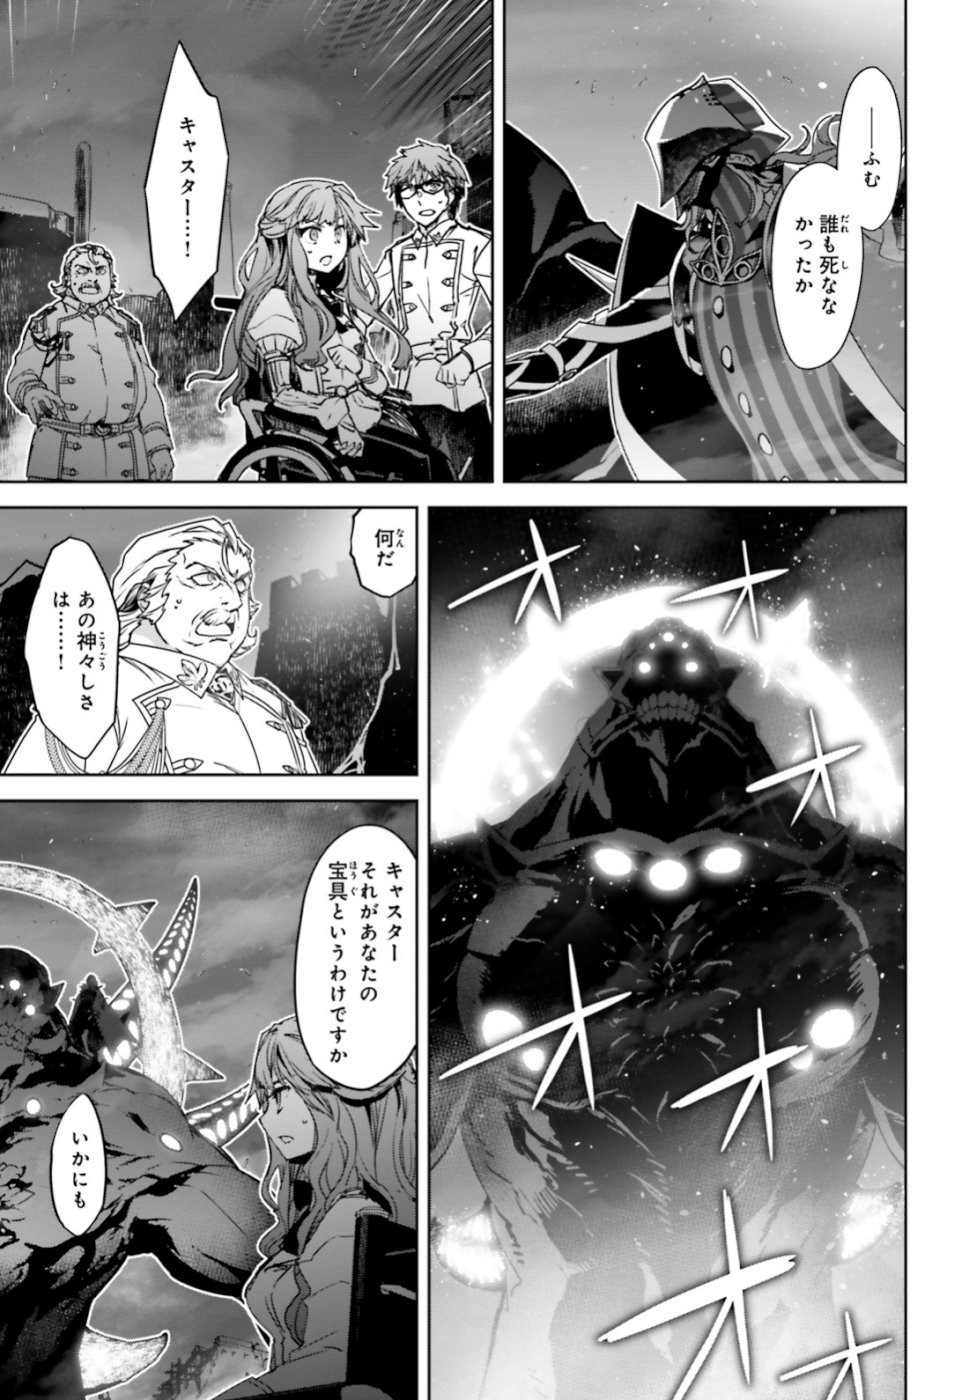 Fate-Apocrypha - Chapter 35 - Page 3